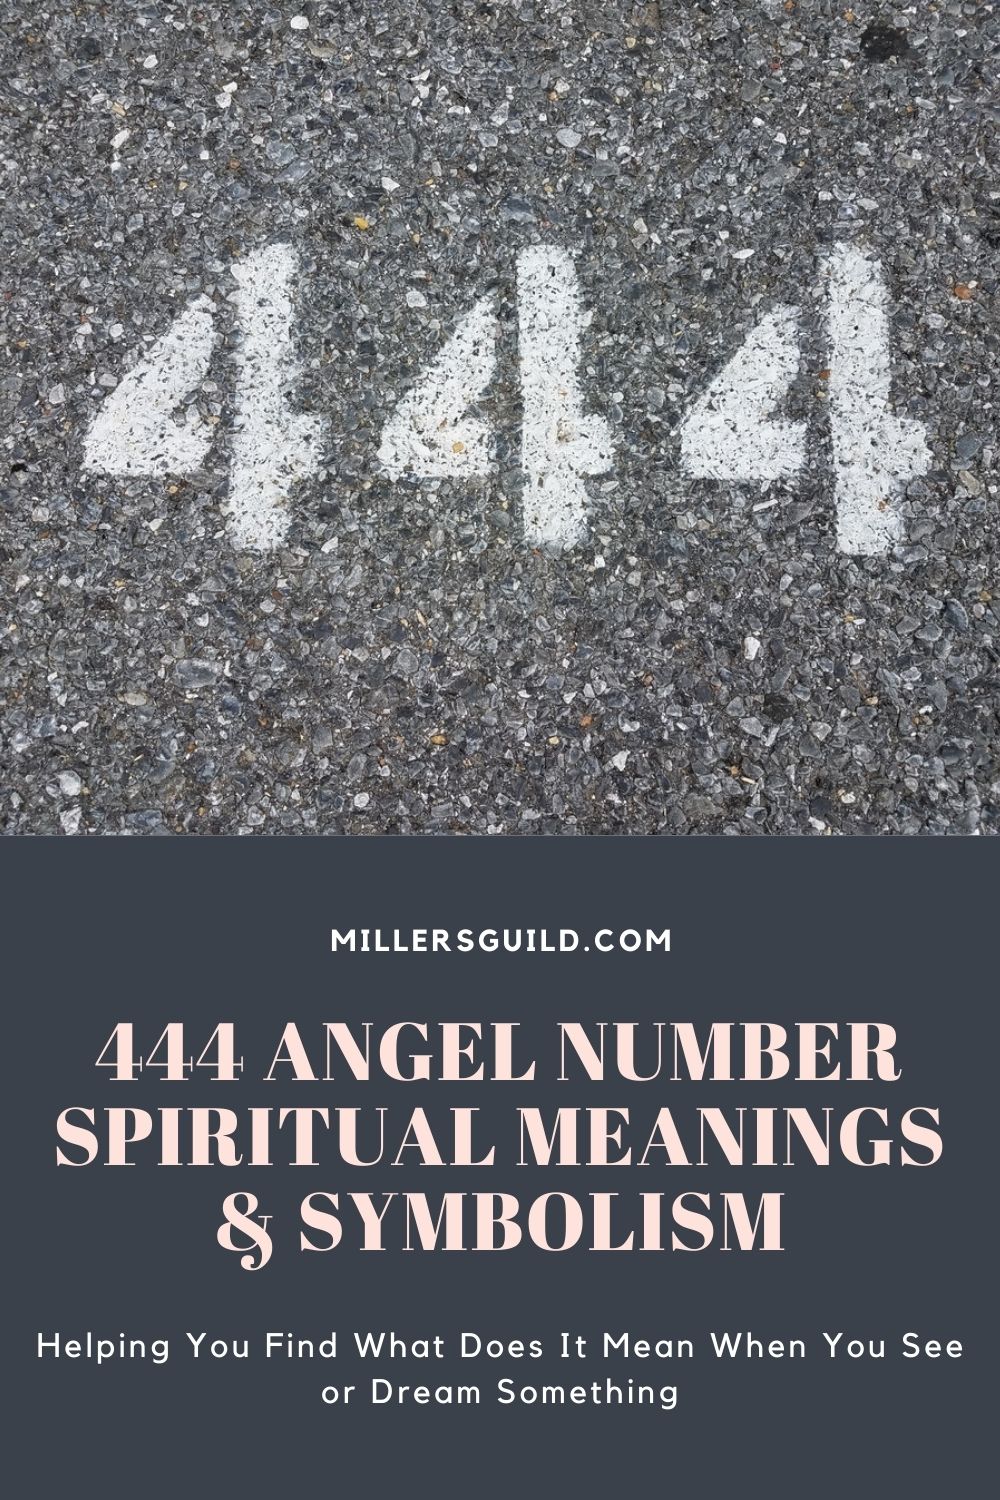 444 Angel Number Spiritual Meanings & Symbolism 1